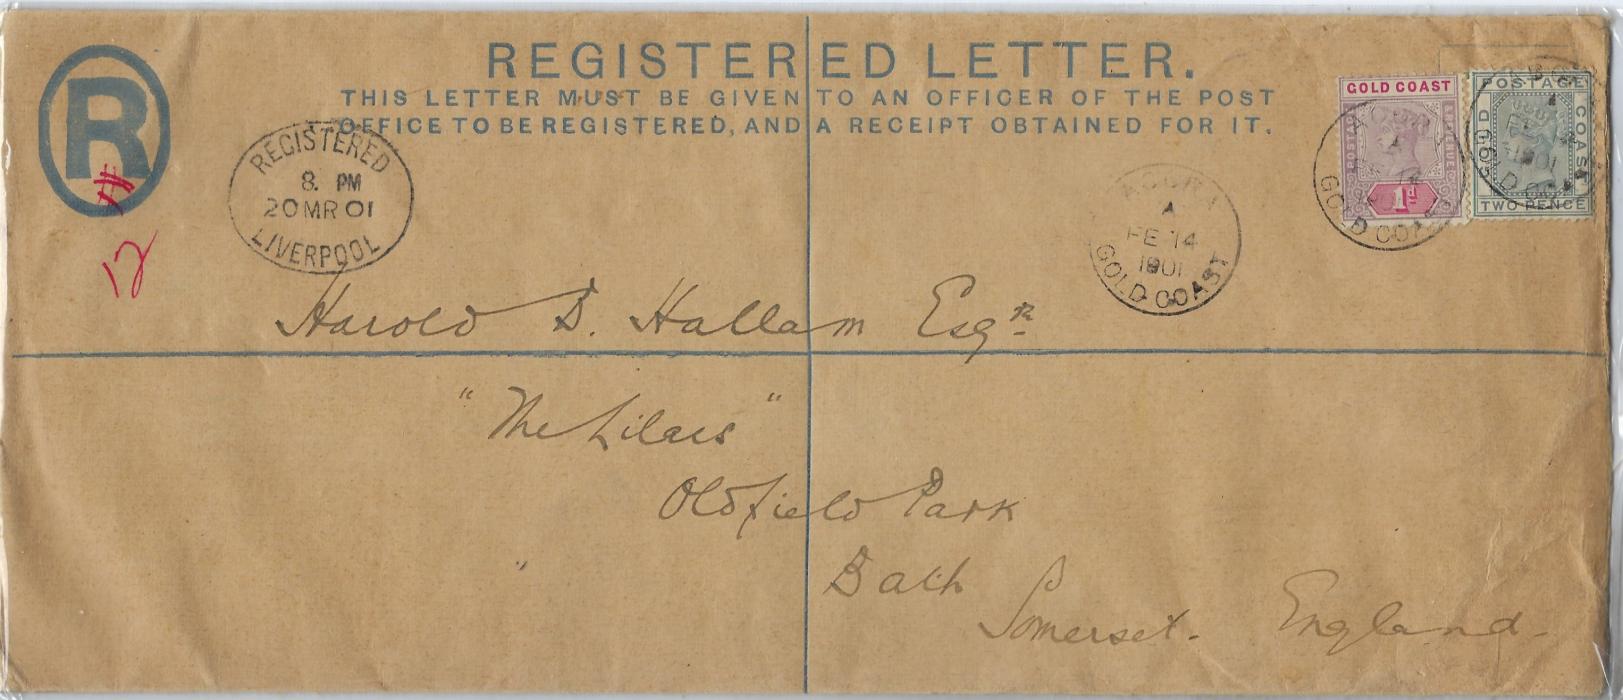 Gold Coast 1901 (FE 14) 2d. registration envelope, size H2, uprated with mixed issue 1d. and 2d. to Bath, tied Accra cds, Liverpool transit cds at left, arrival backstamp; fine unfolded.